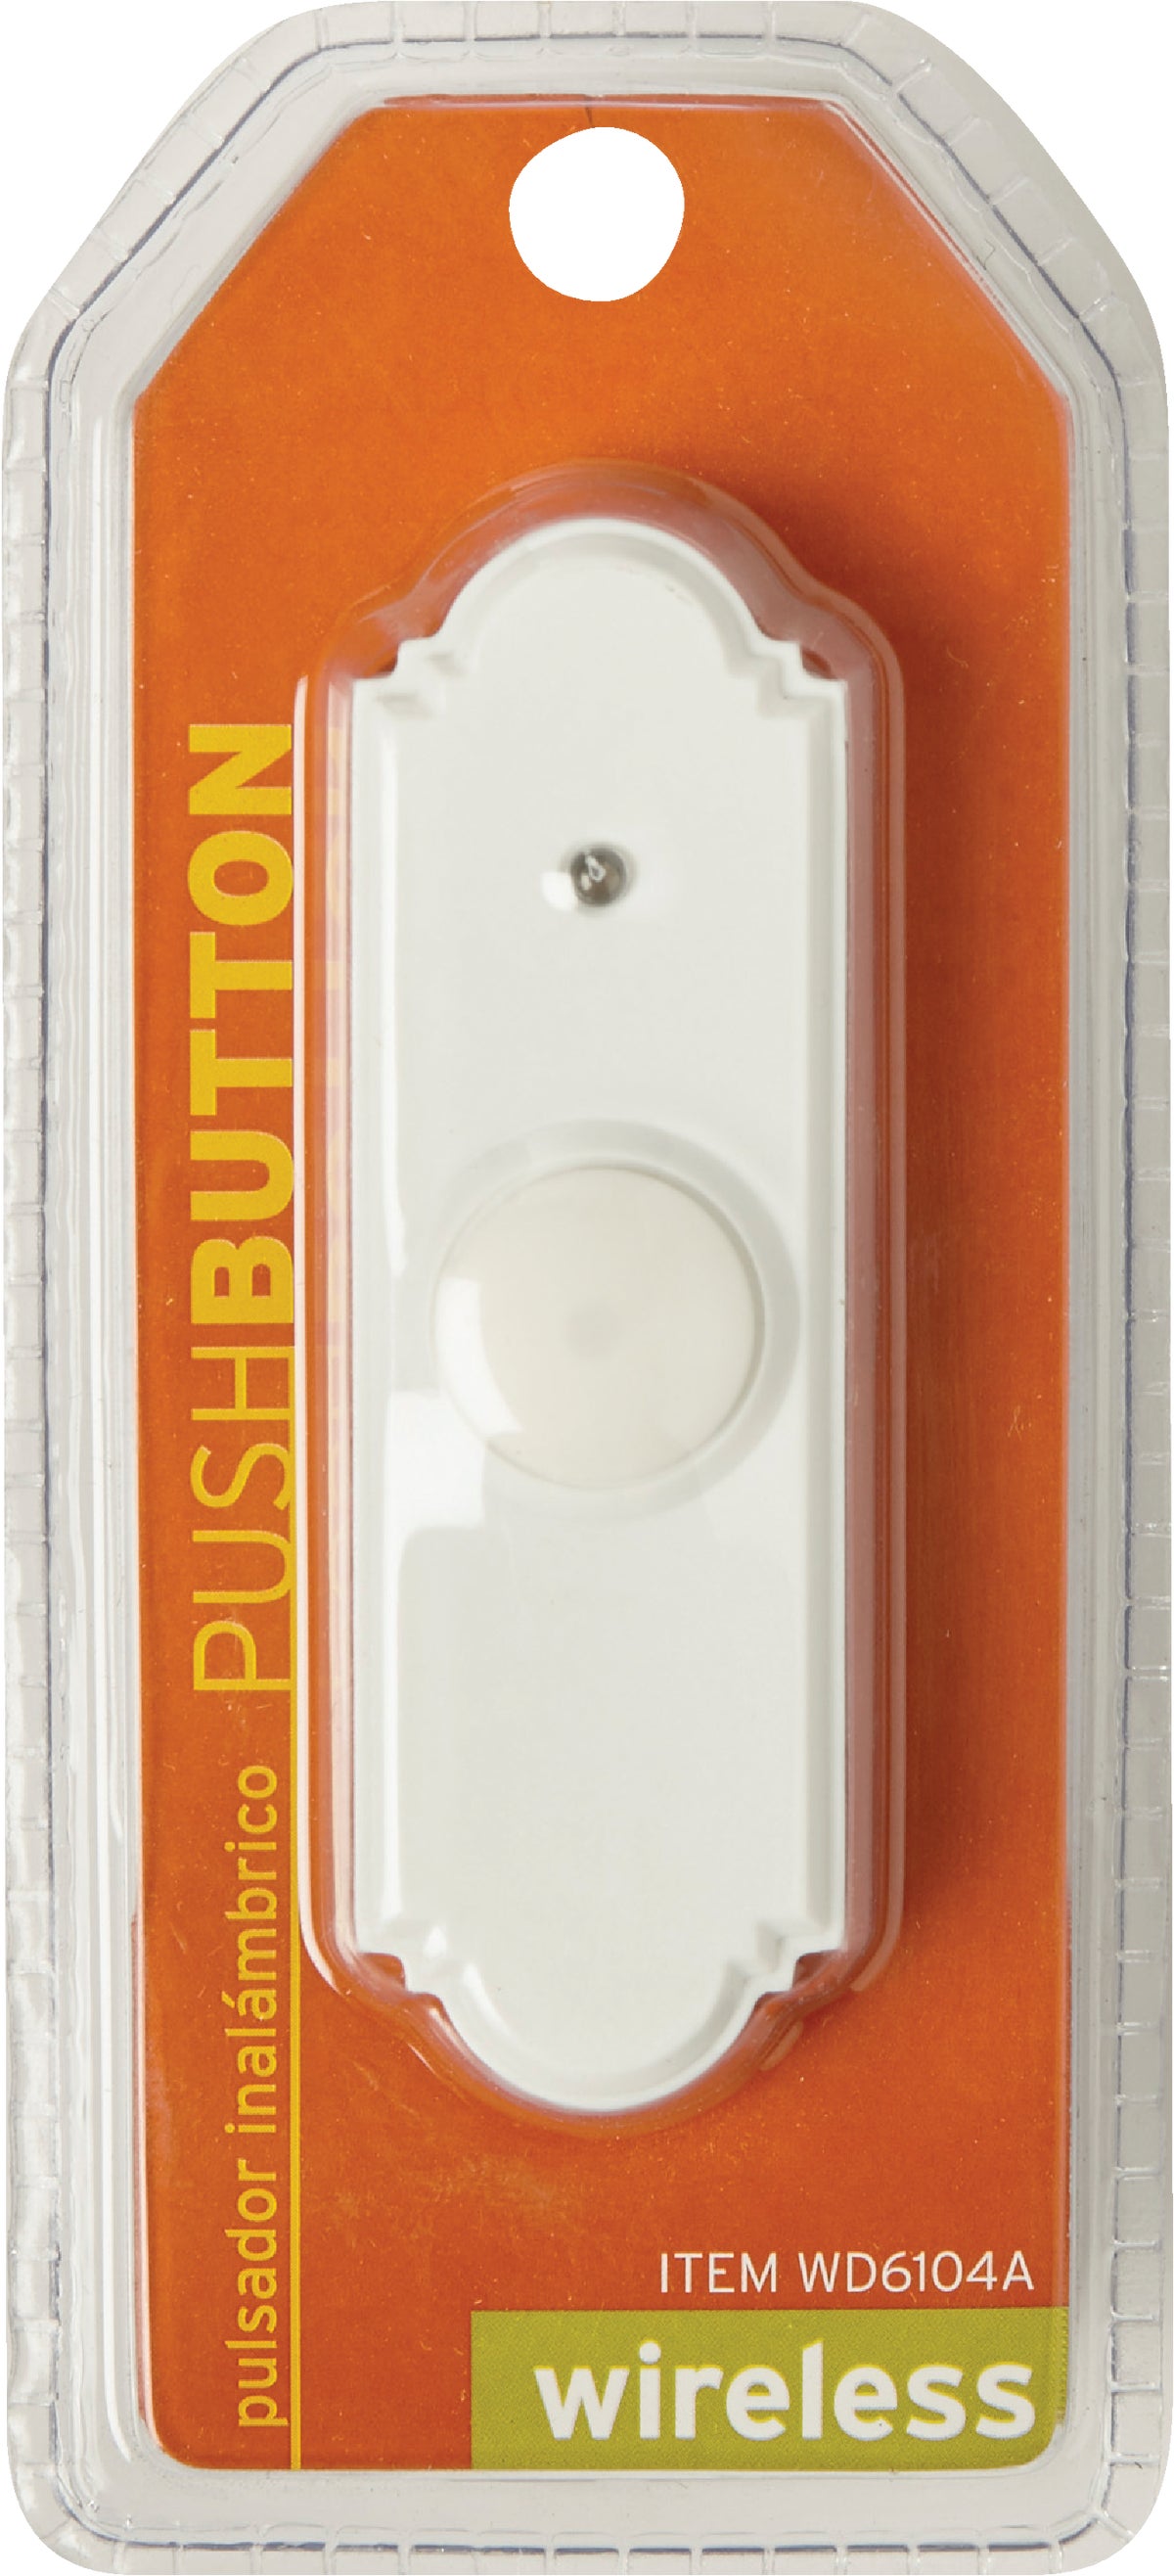 slimline doorbell button does power chime